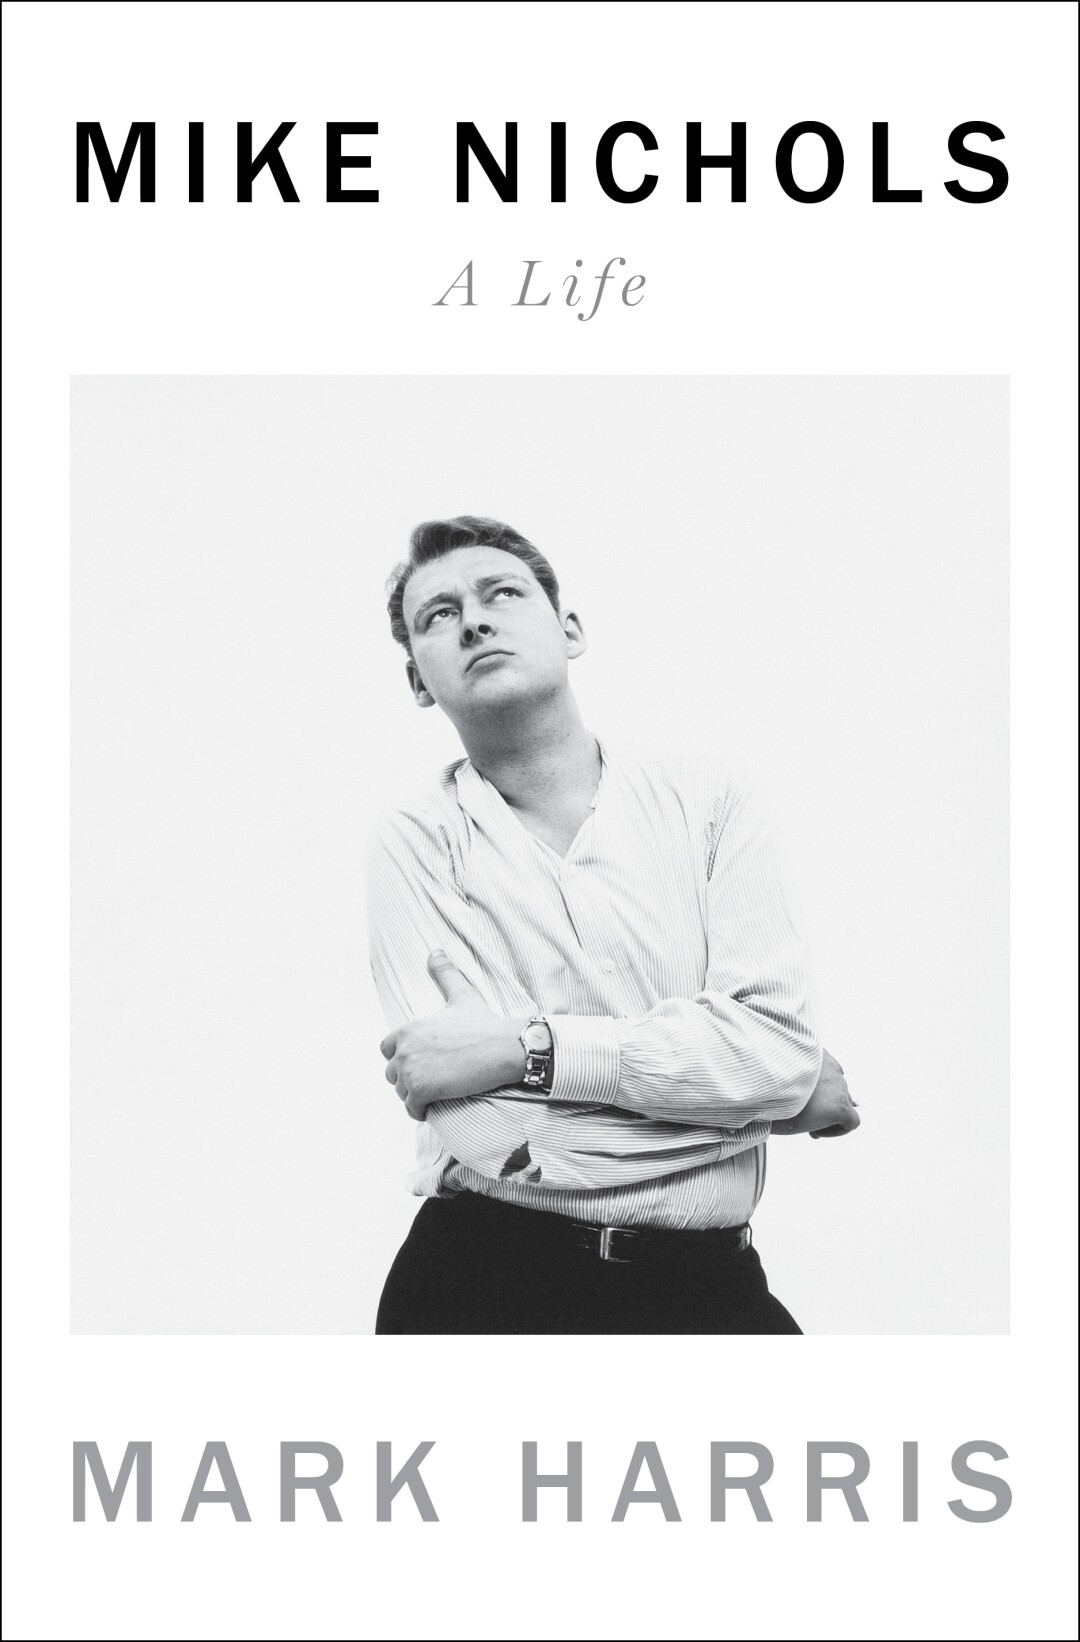 A young Mike Nichols is pictured on the cover of "Mike Nichols: A Life," by Mark Harris.